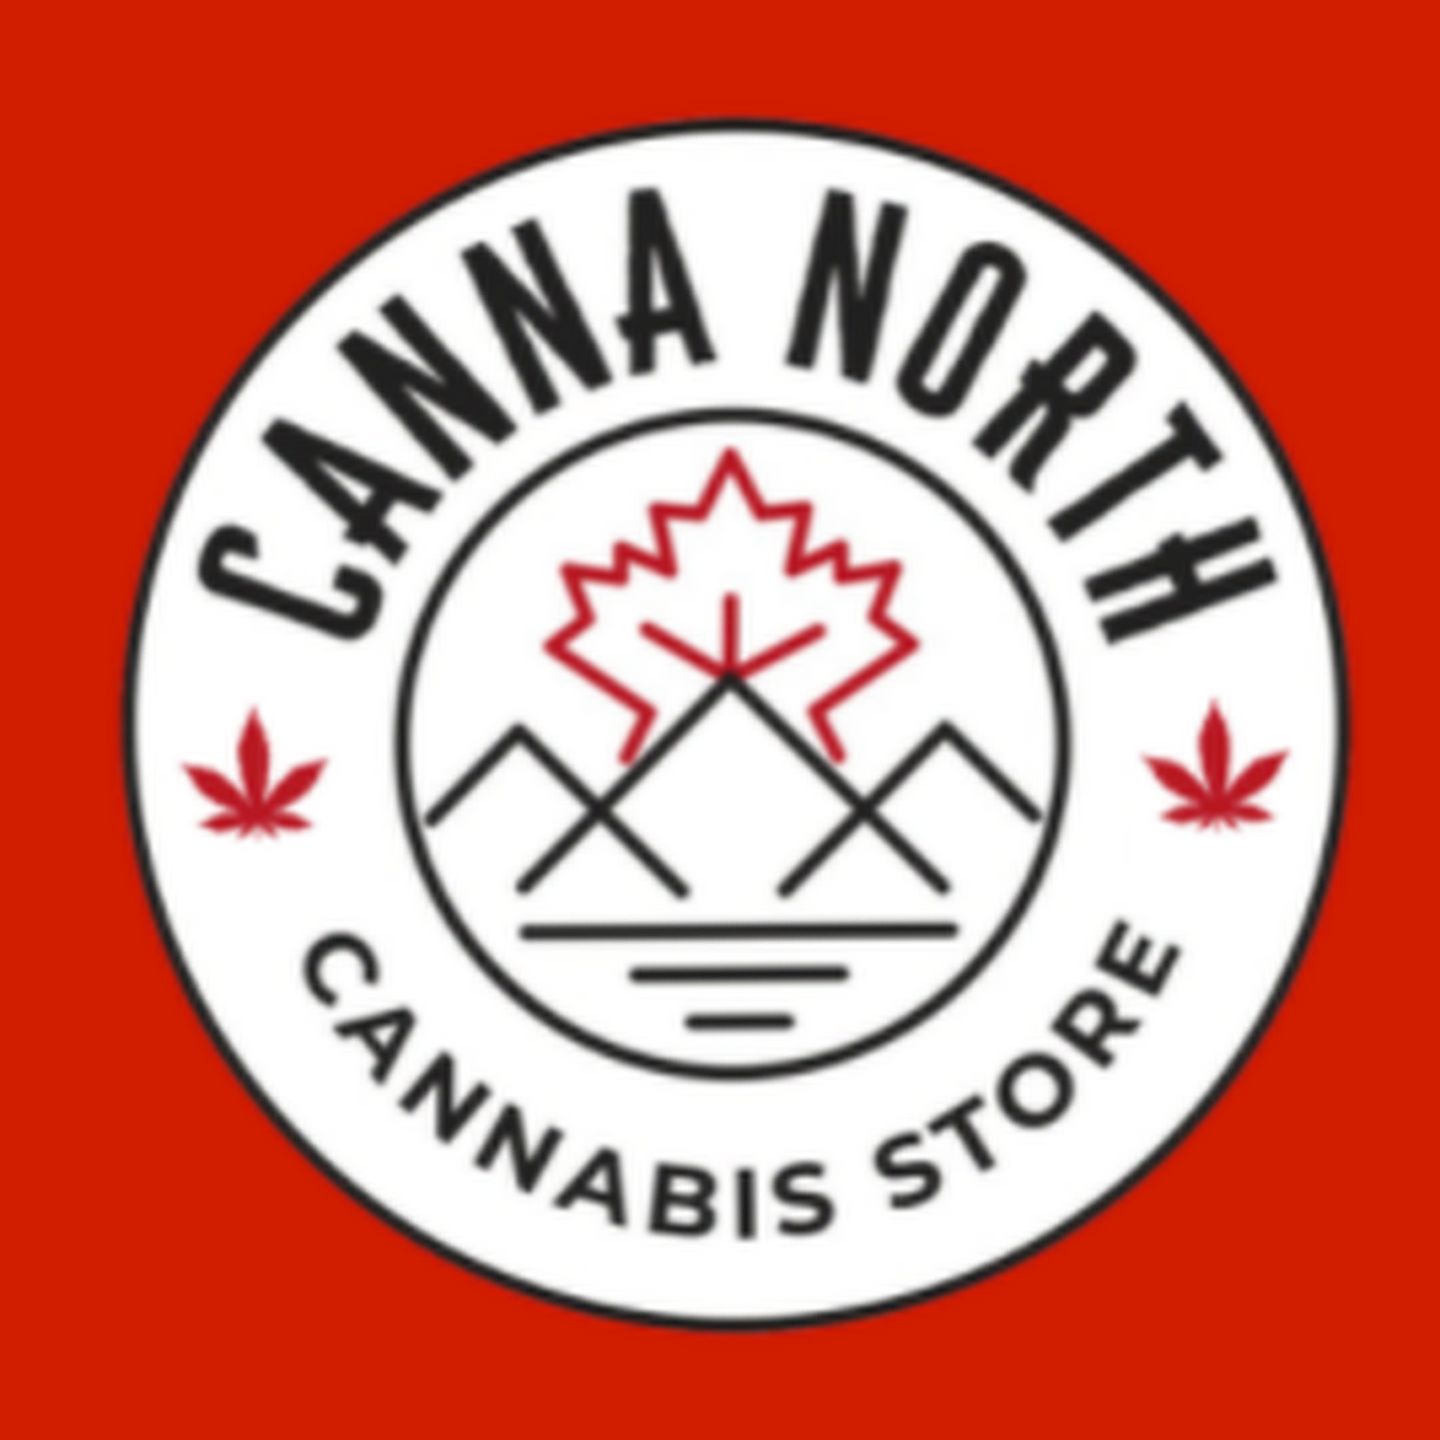 image feature Canna North Cannabis Store - Baseline